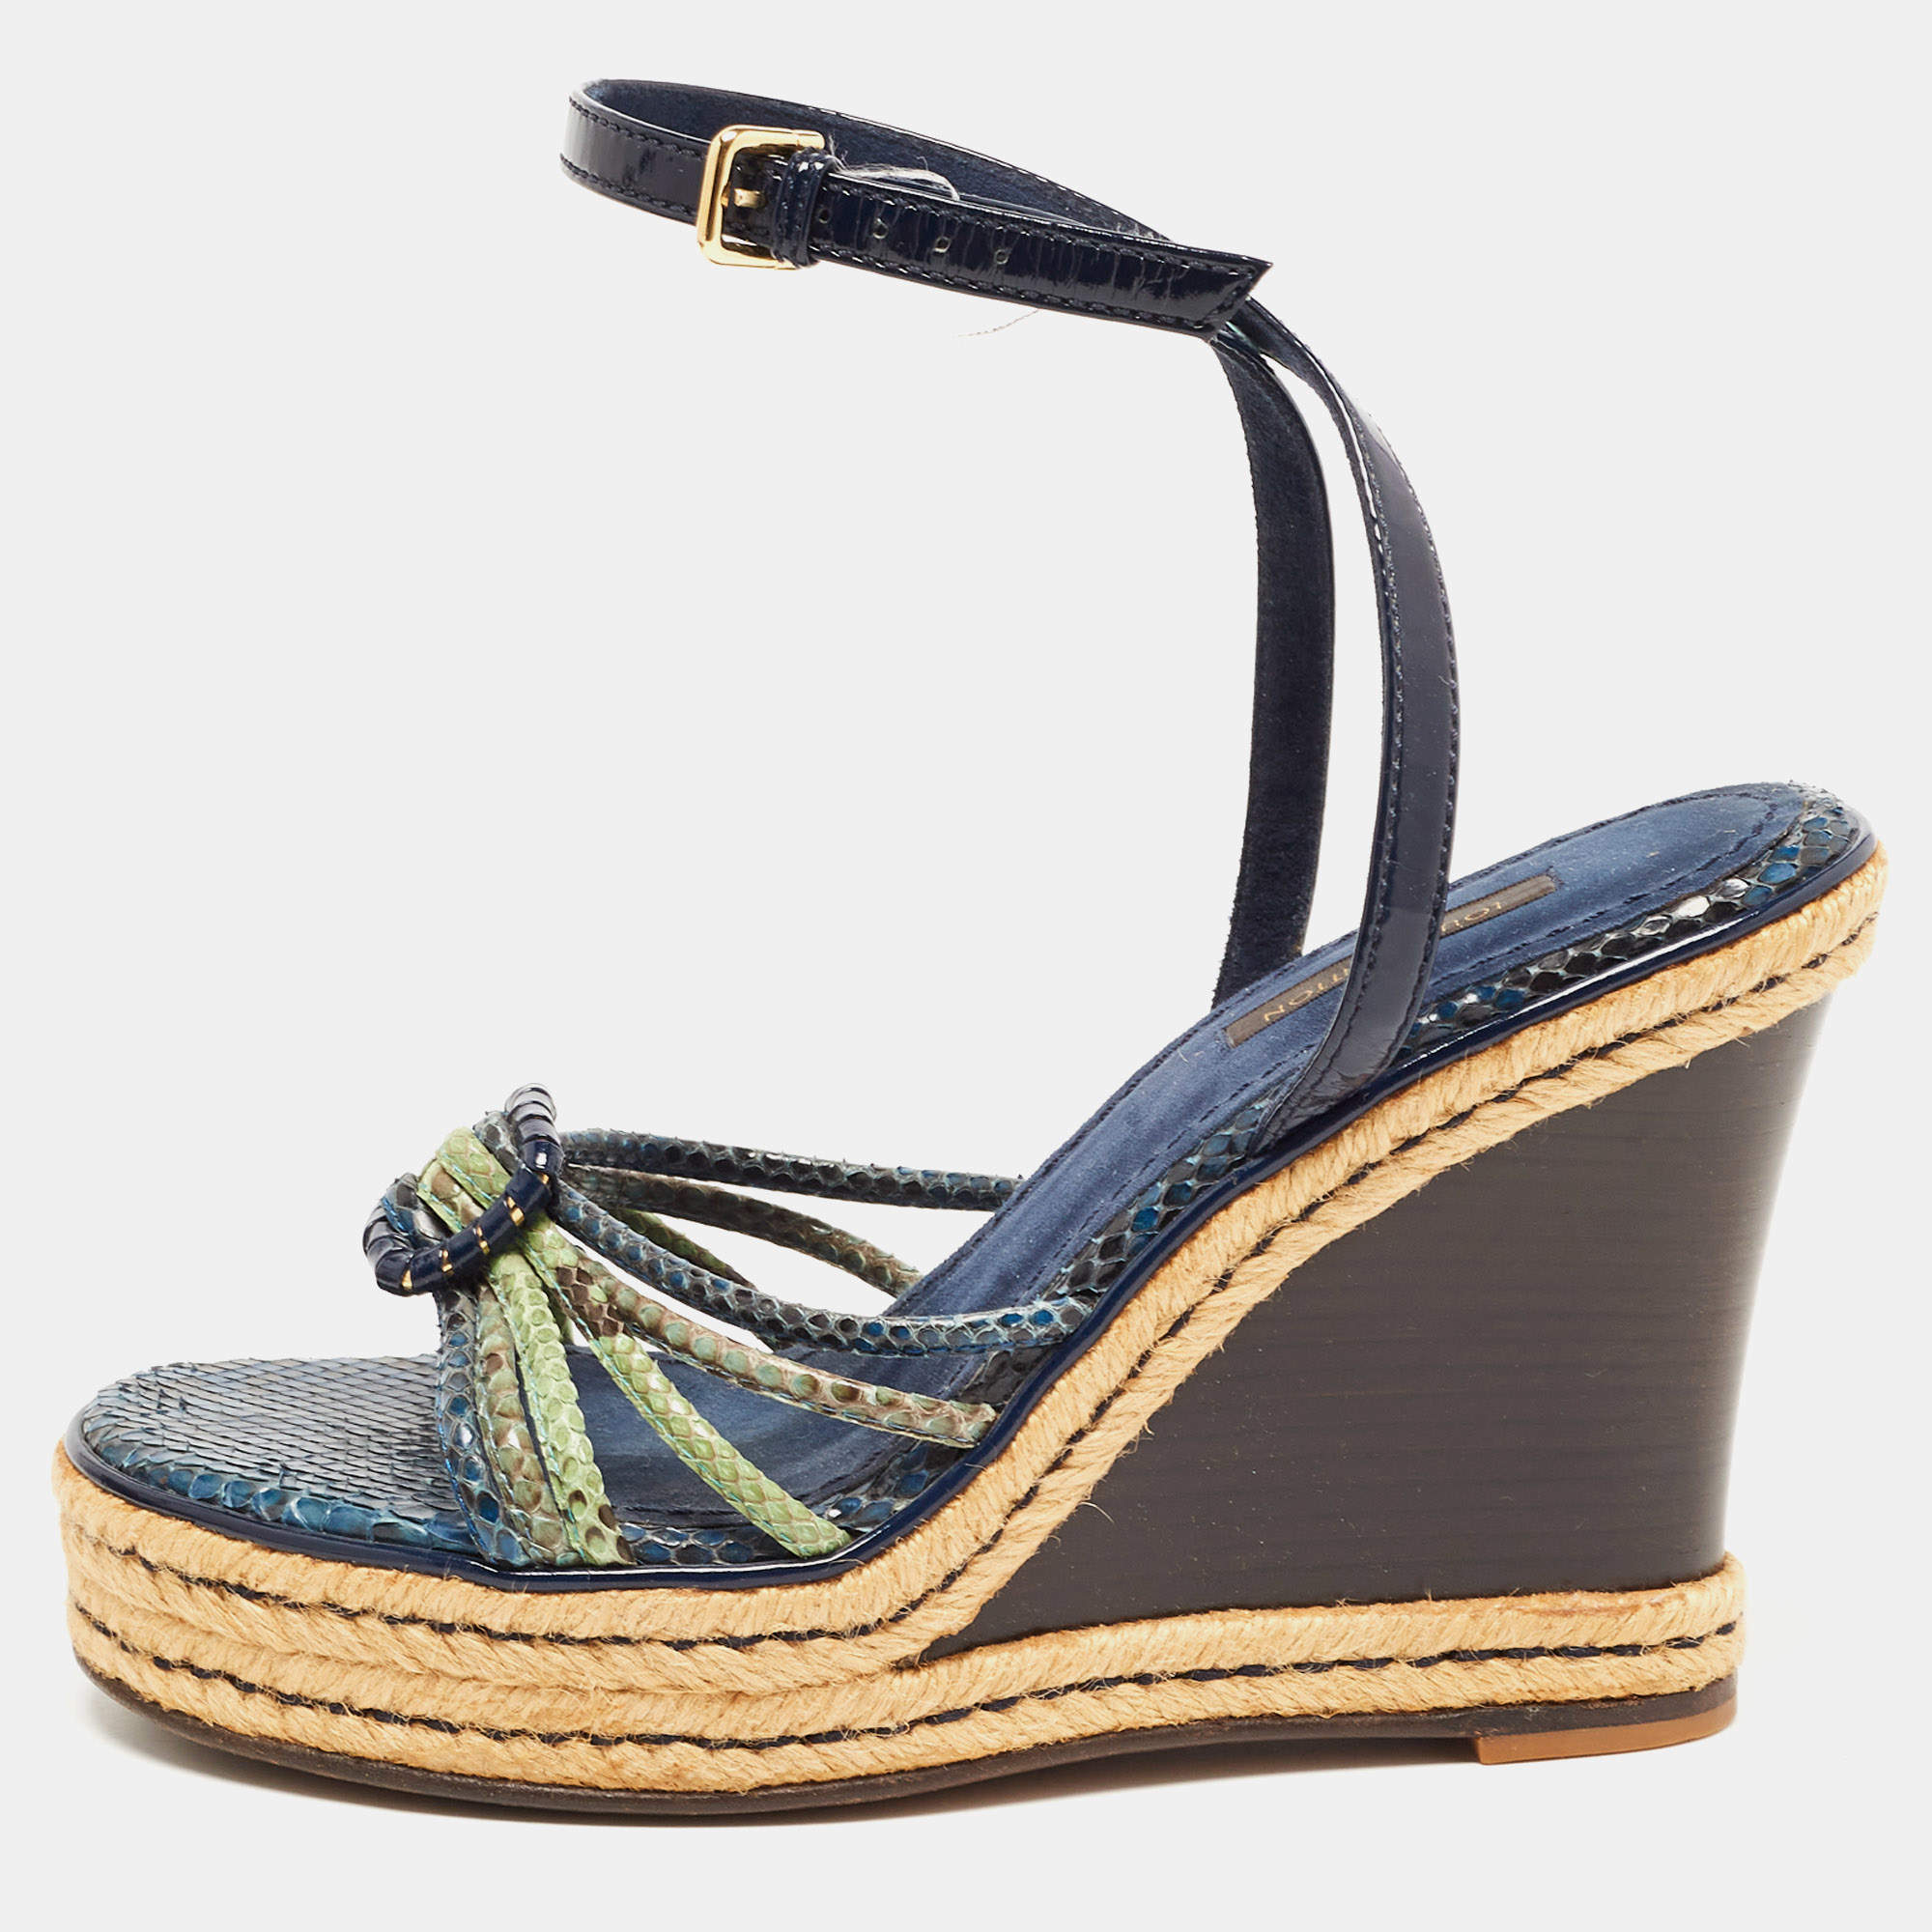 Louis Vuitton Navy Blue/Green Snakeskin and Patent Leather Wedge